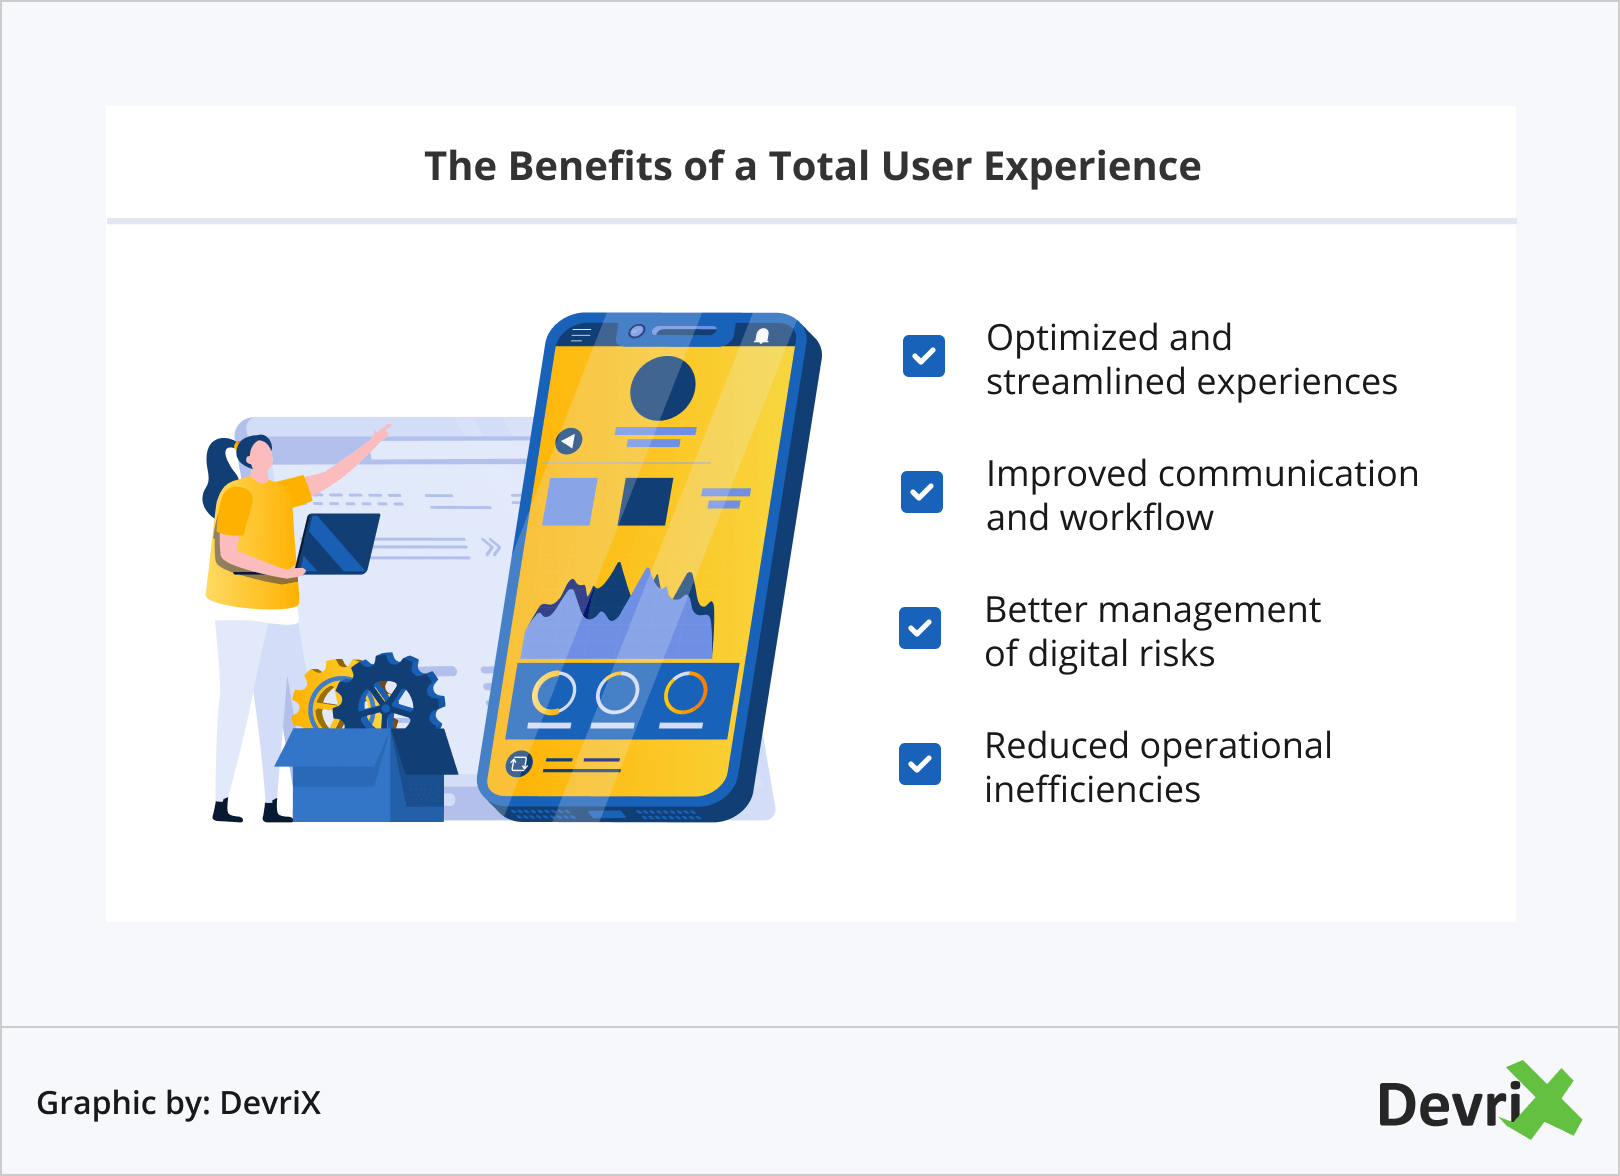 The Benefits of a Total User Experience